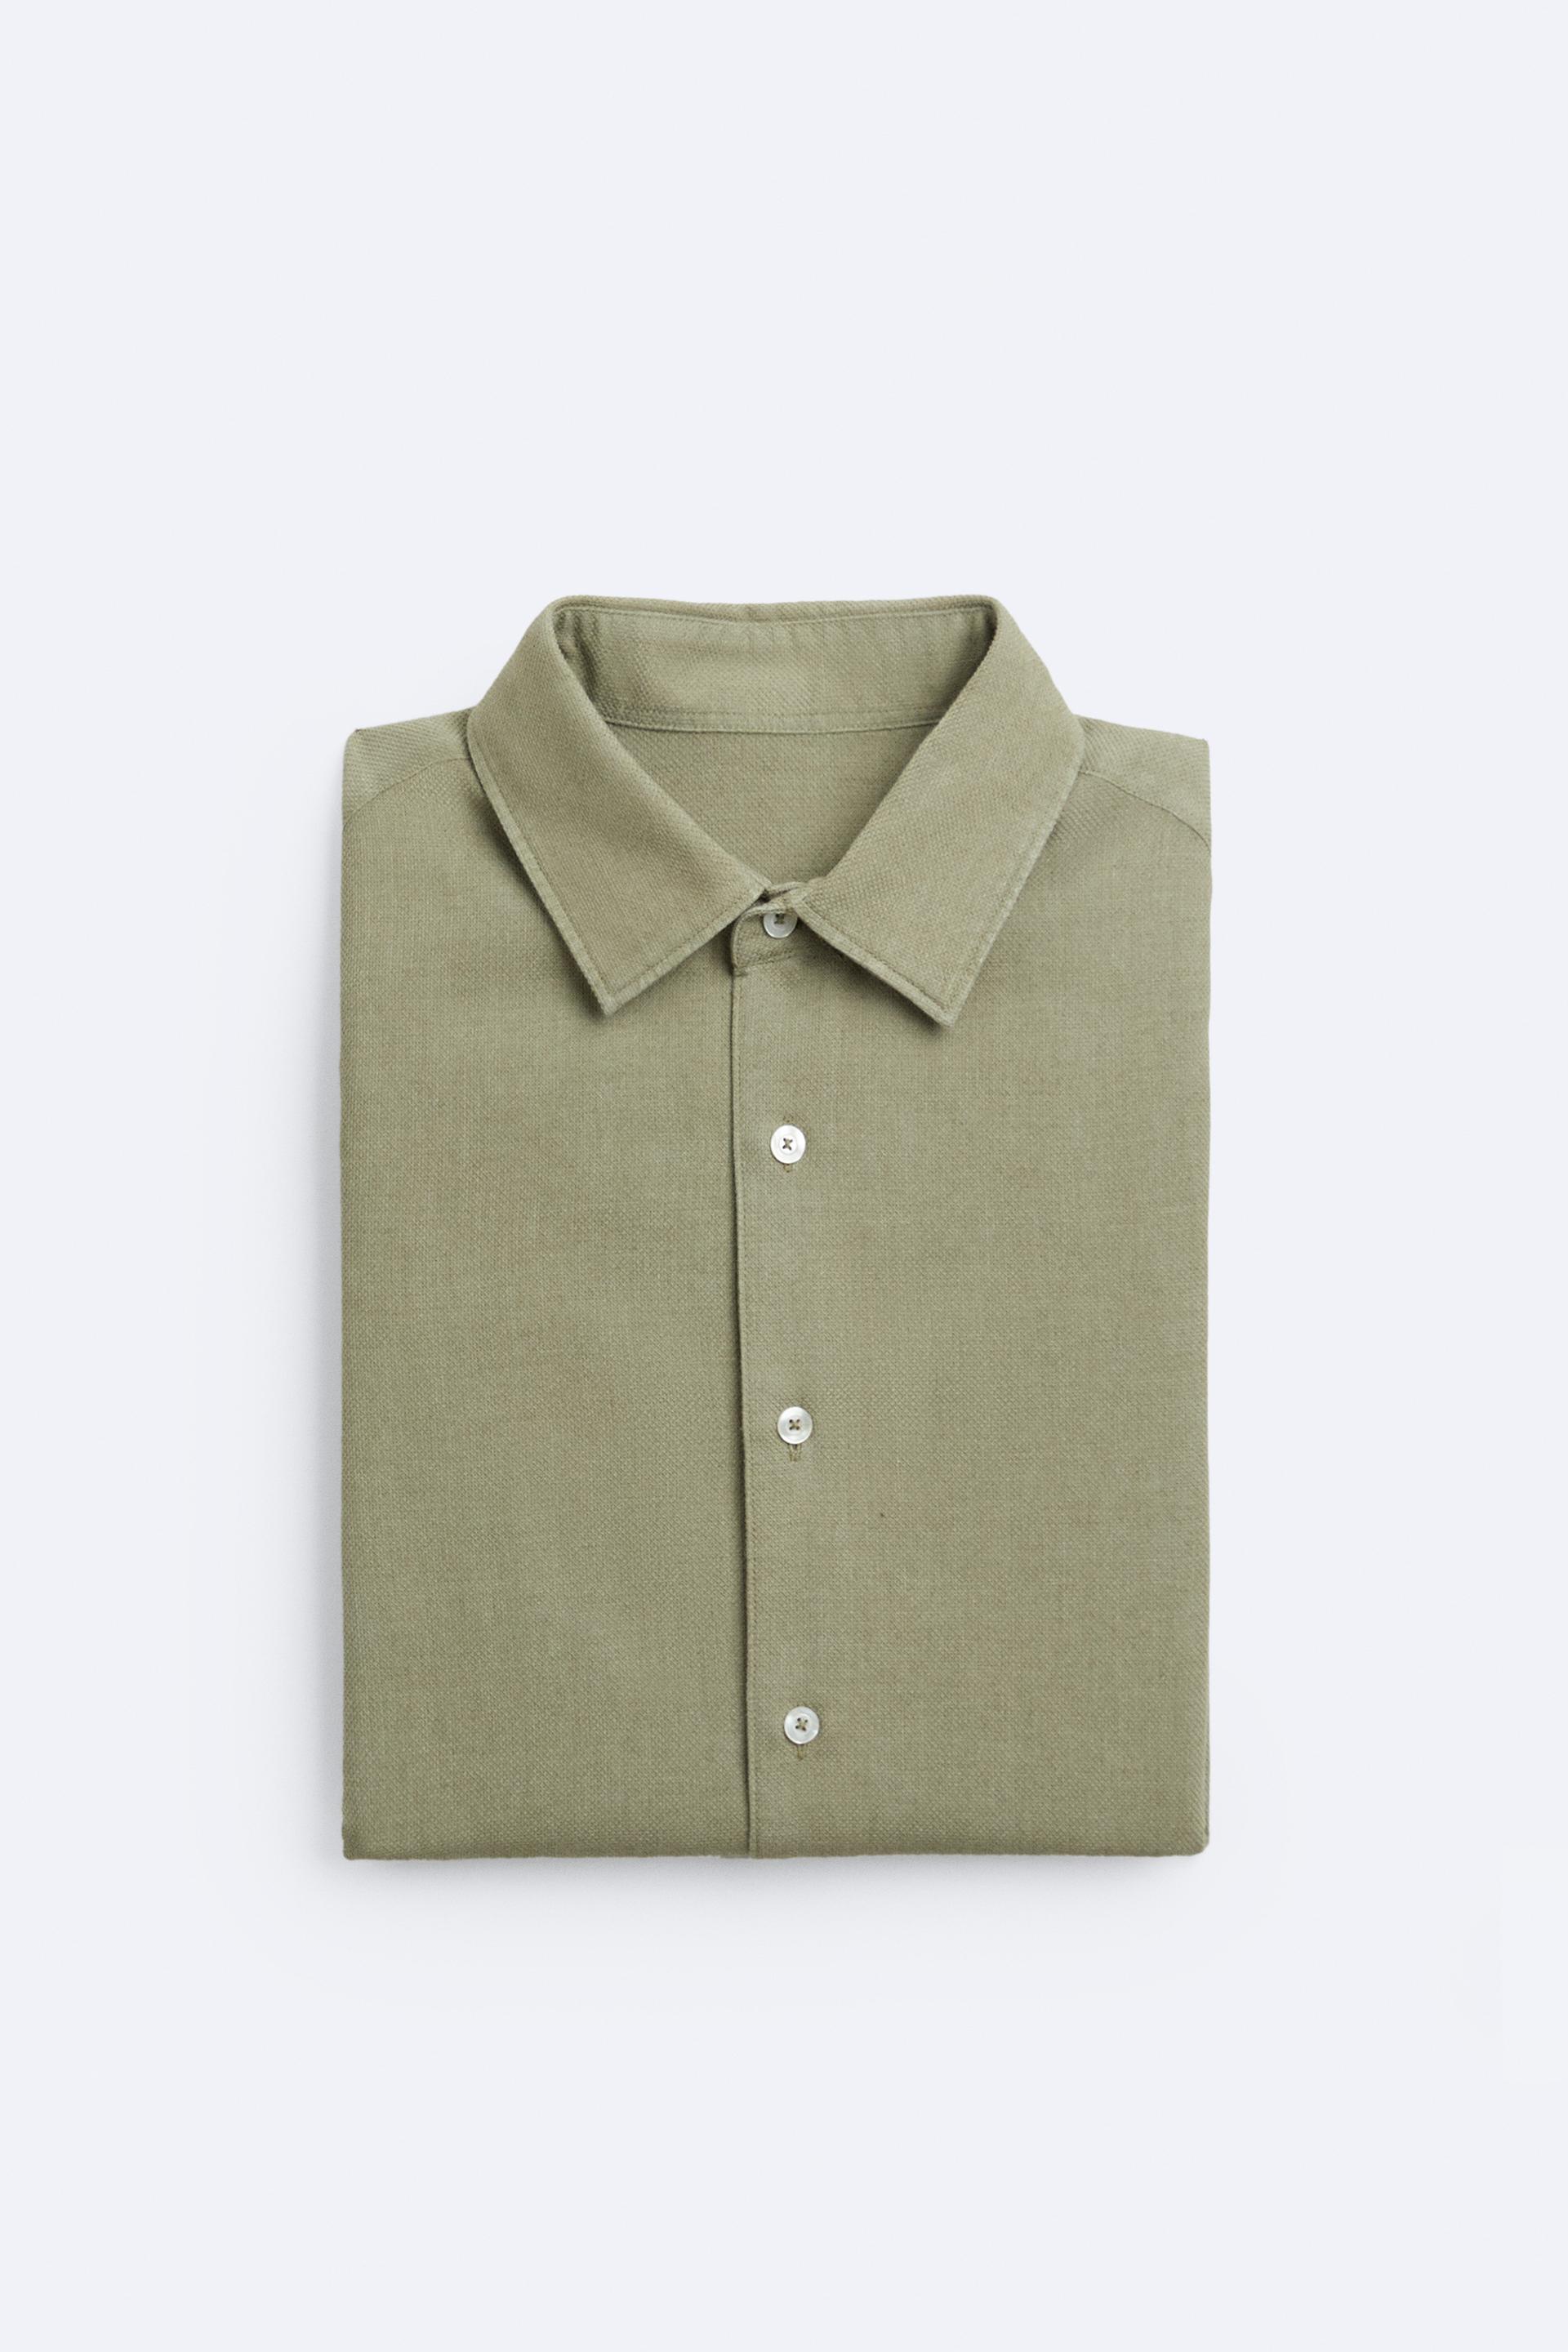 EASY CARE TEXTURED SHIRT - Printed